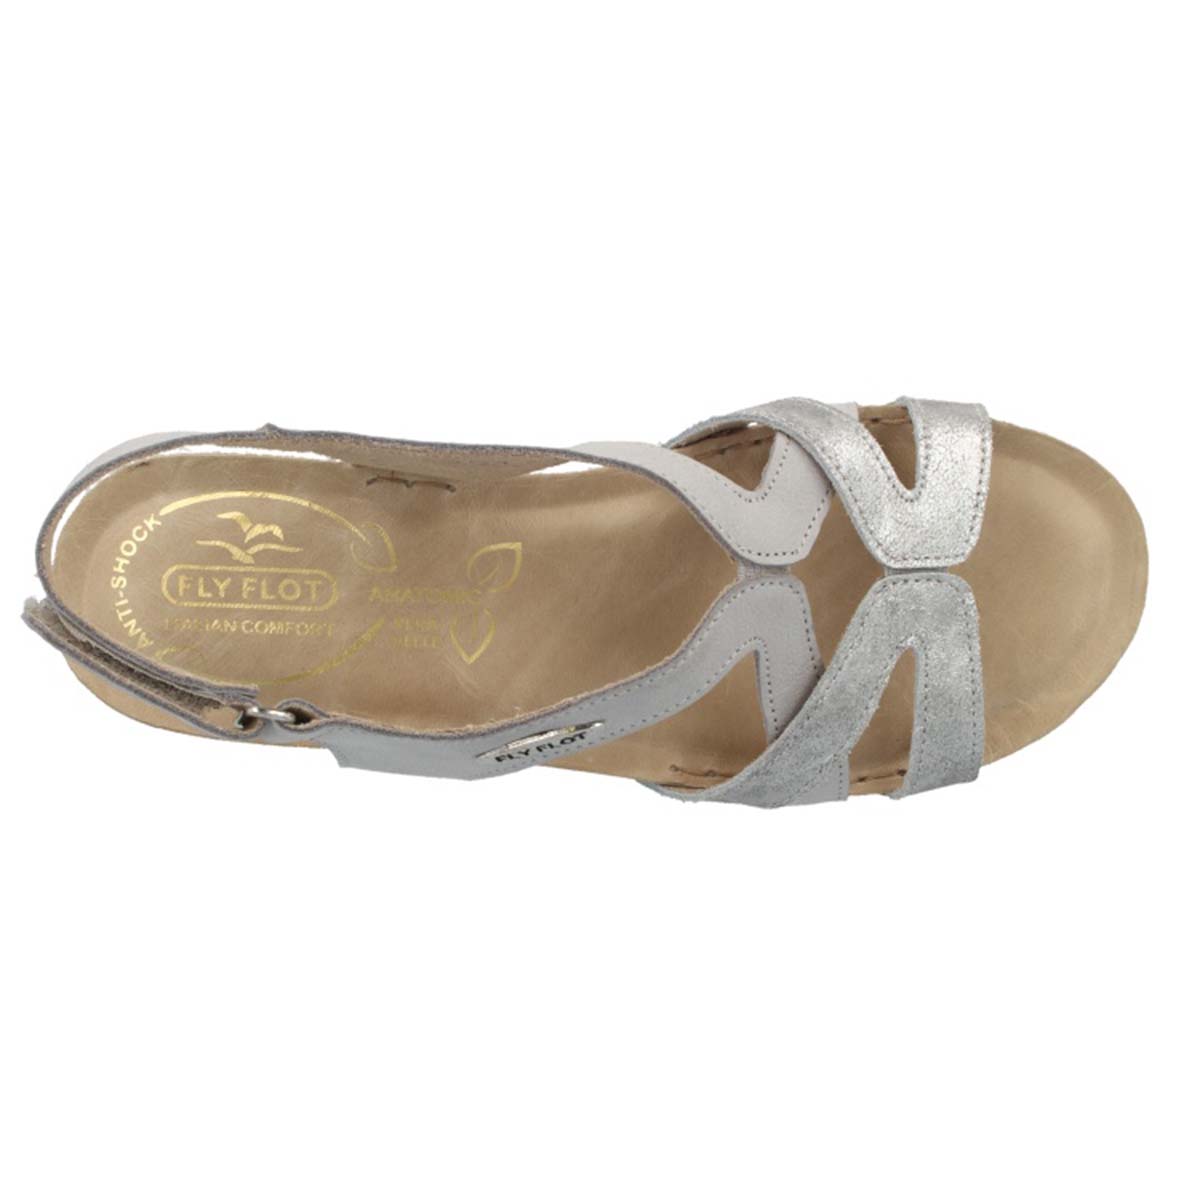 See the Light Grey Velcro Back Strap Women Sandals With Anti-Shock Cushioned Leather Insole in the colour LIGHT GREY, available in various sizes